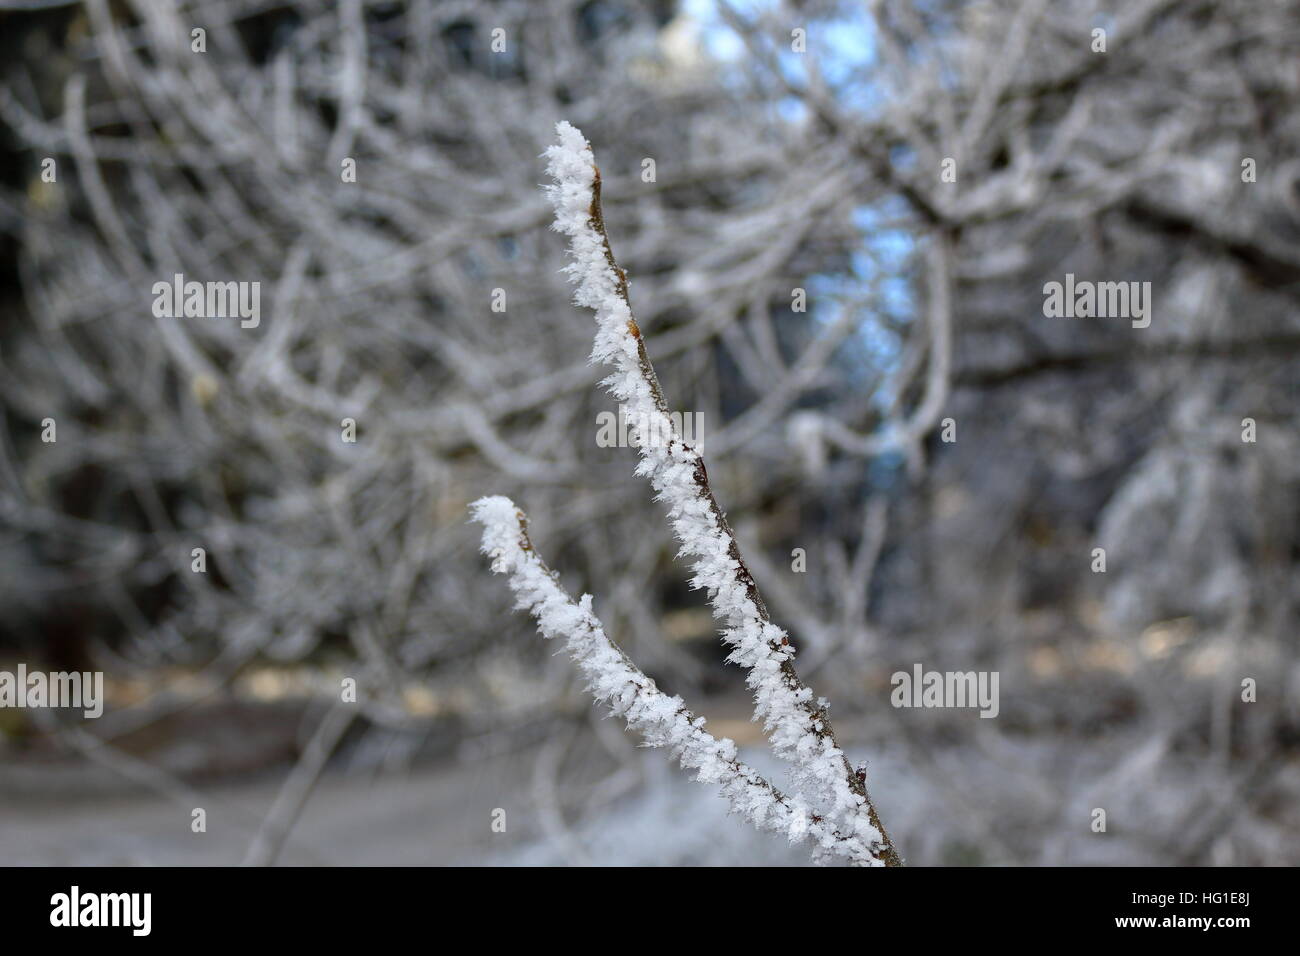 A branch littered with ice Stock Photo